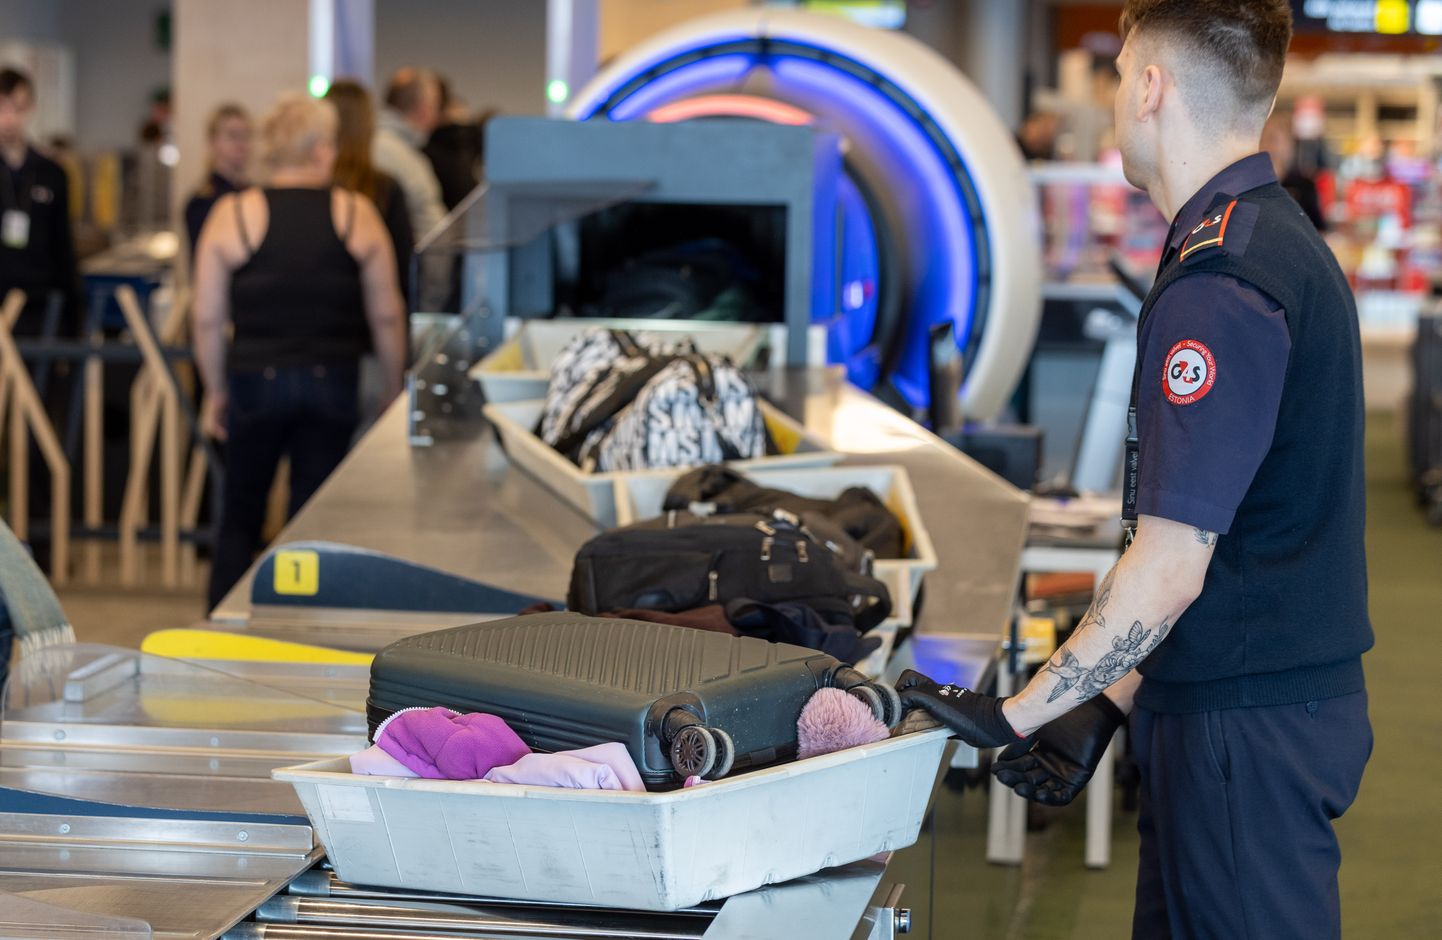 Passengers going through security checks at Tallinn Airport no longer need to remove liquids and large electronic devices from their carry-on baggage.